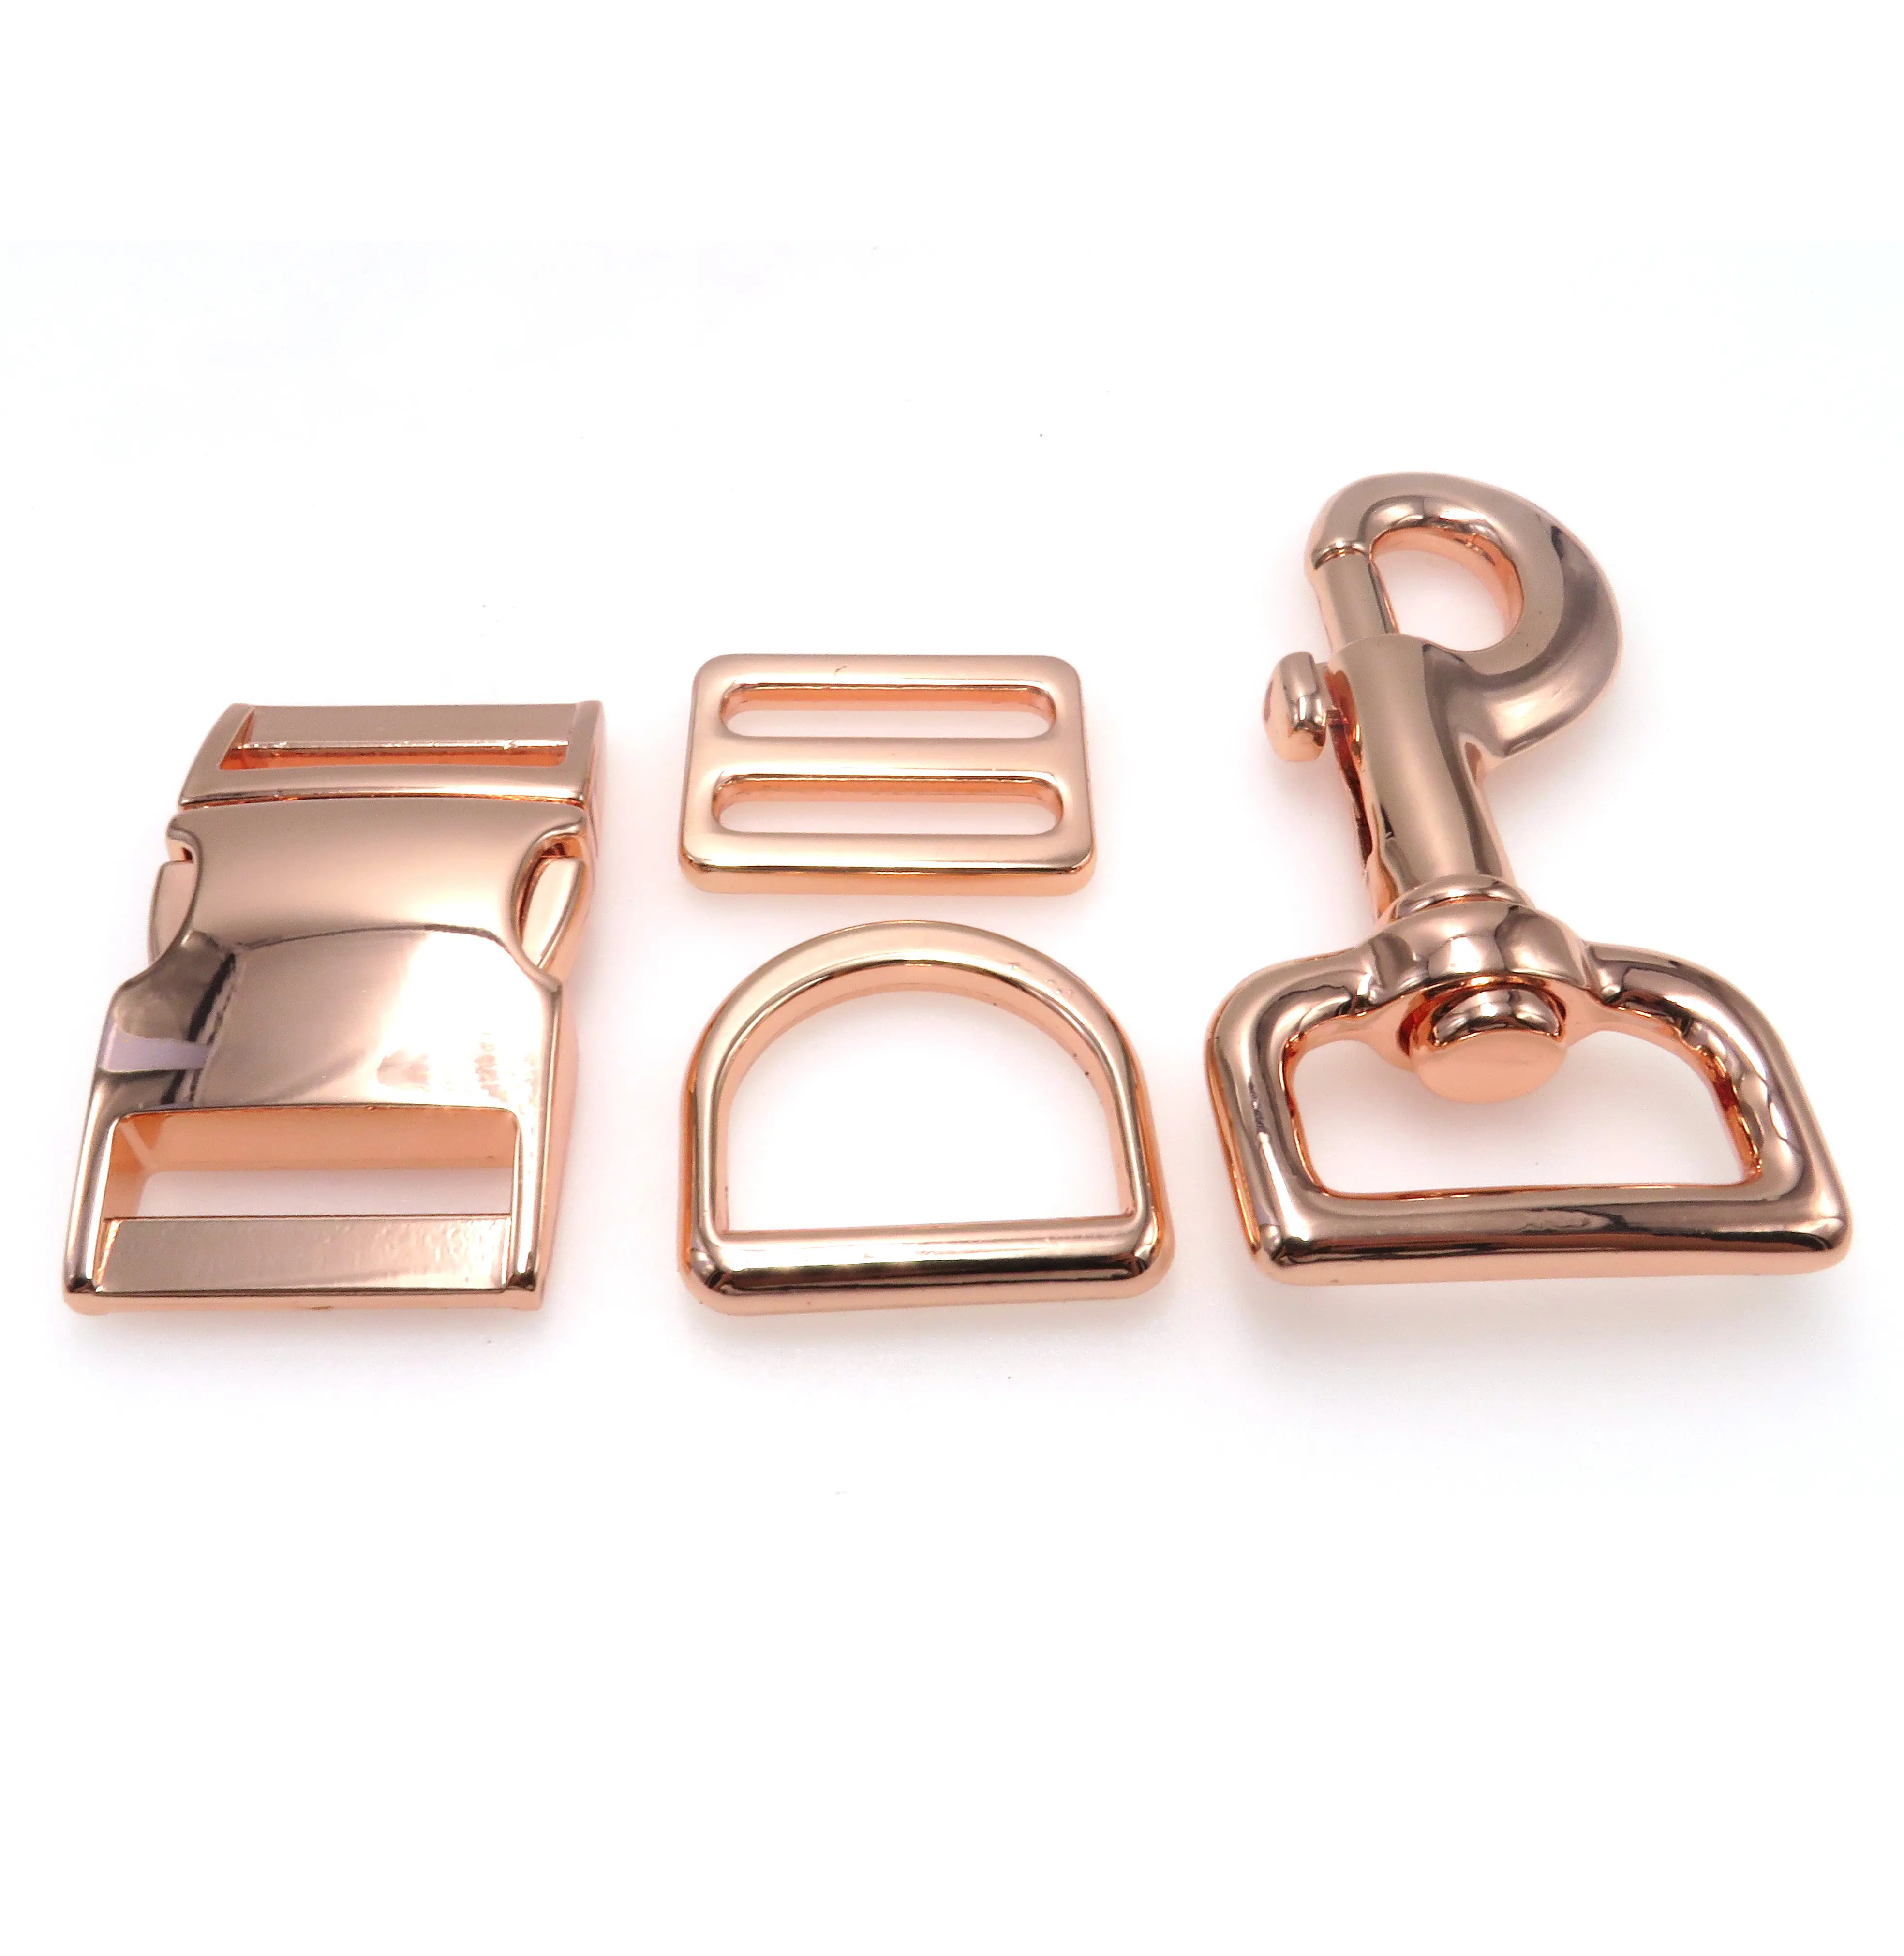 Premium Quality Factory Price Zinc Alloy Metal Dog Collar Buckle set of 4 Accessories Heavy Duty Metal Dog Buckles